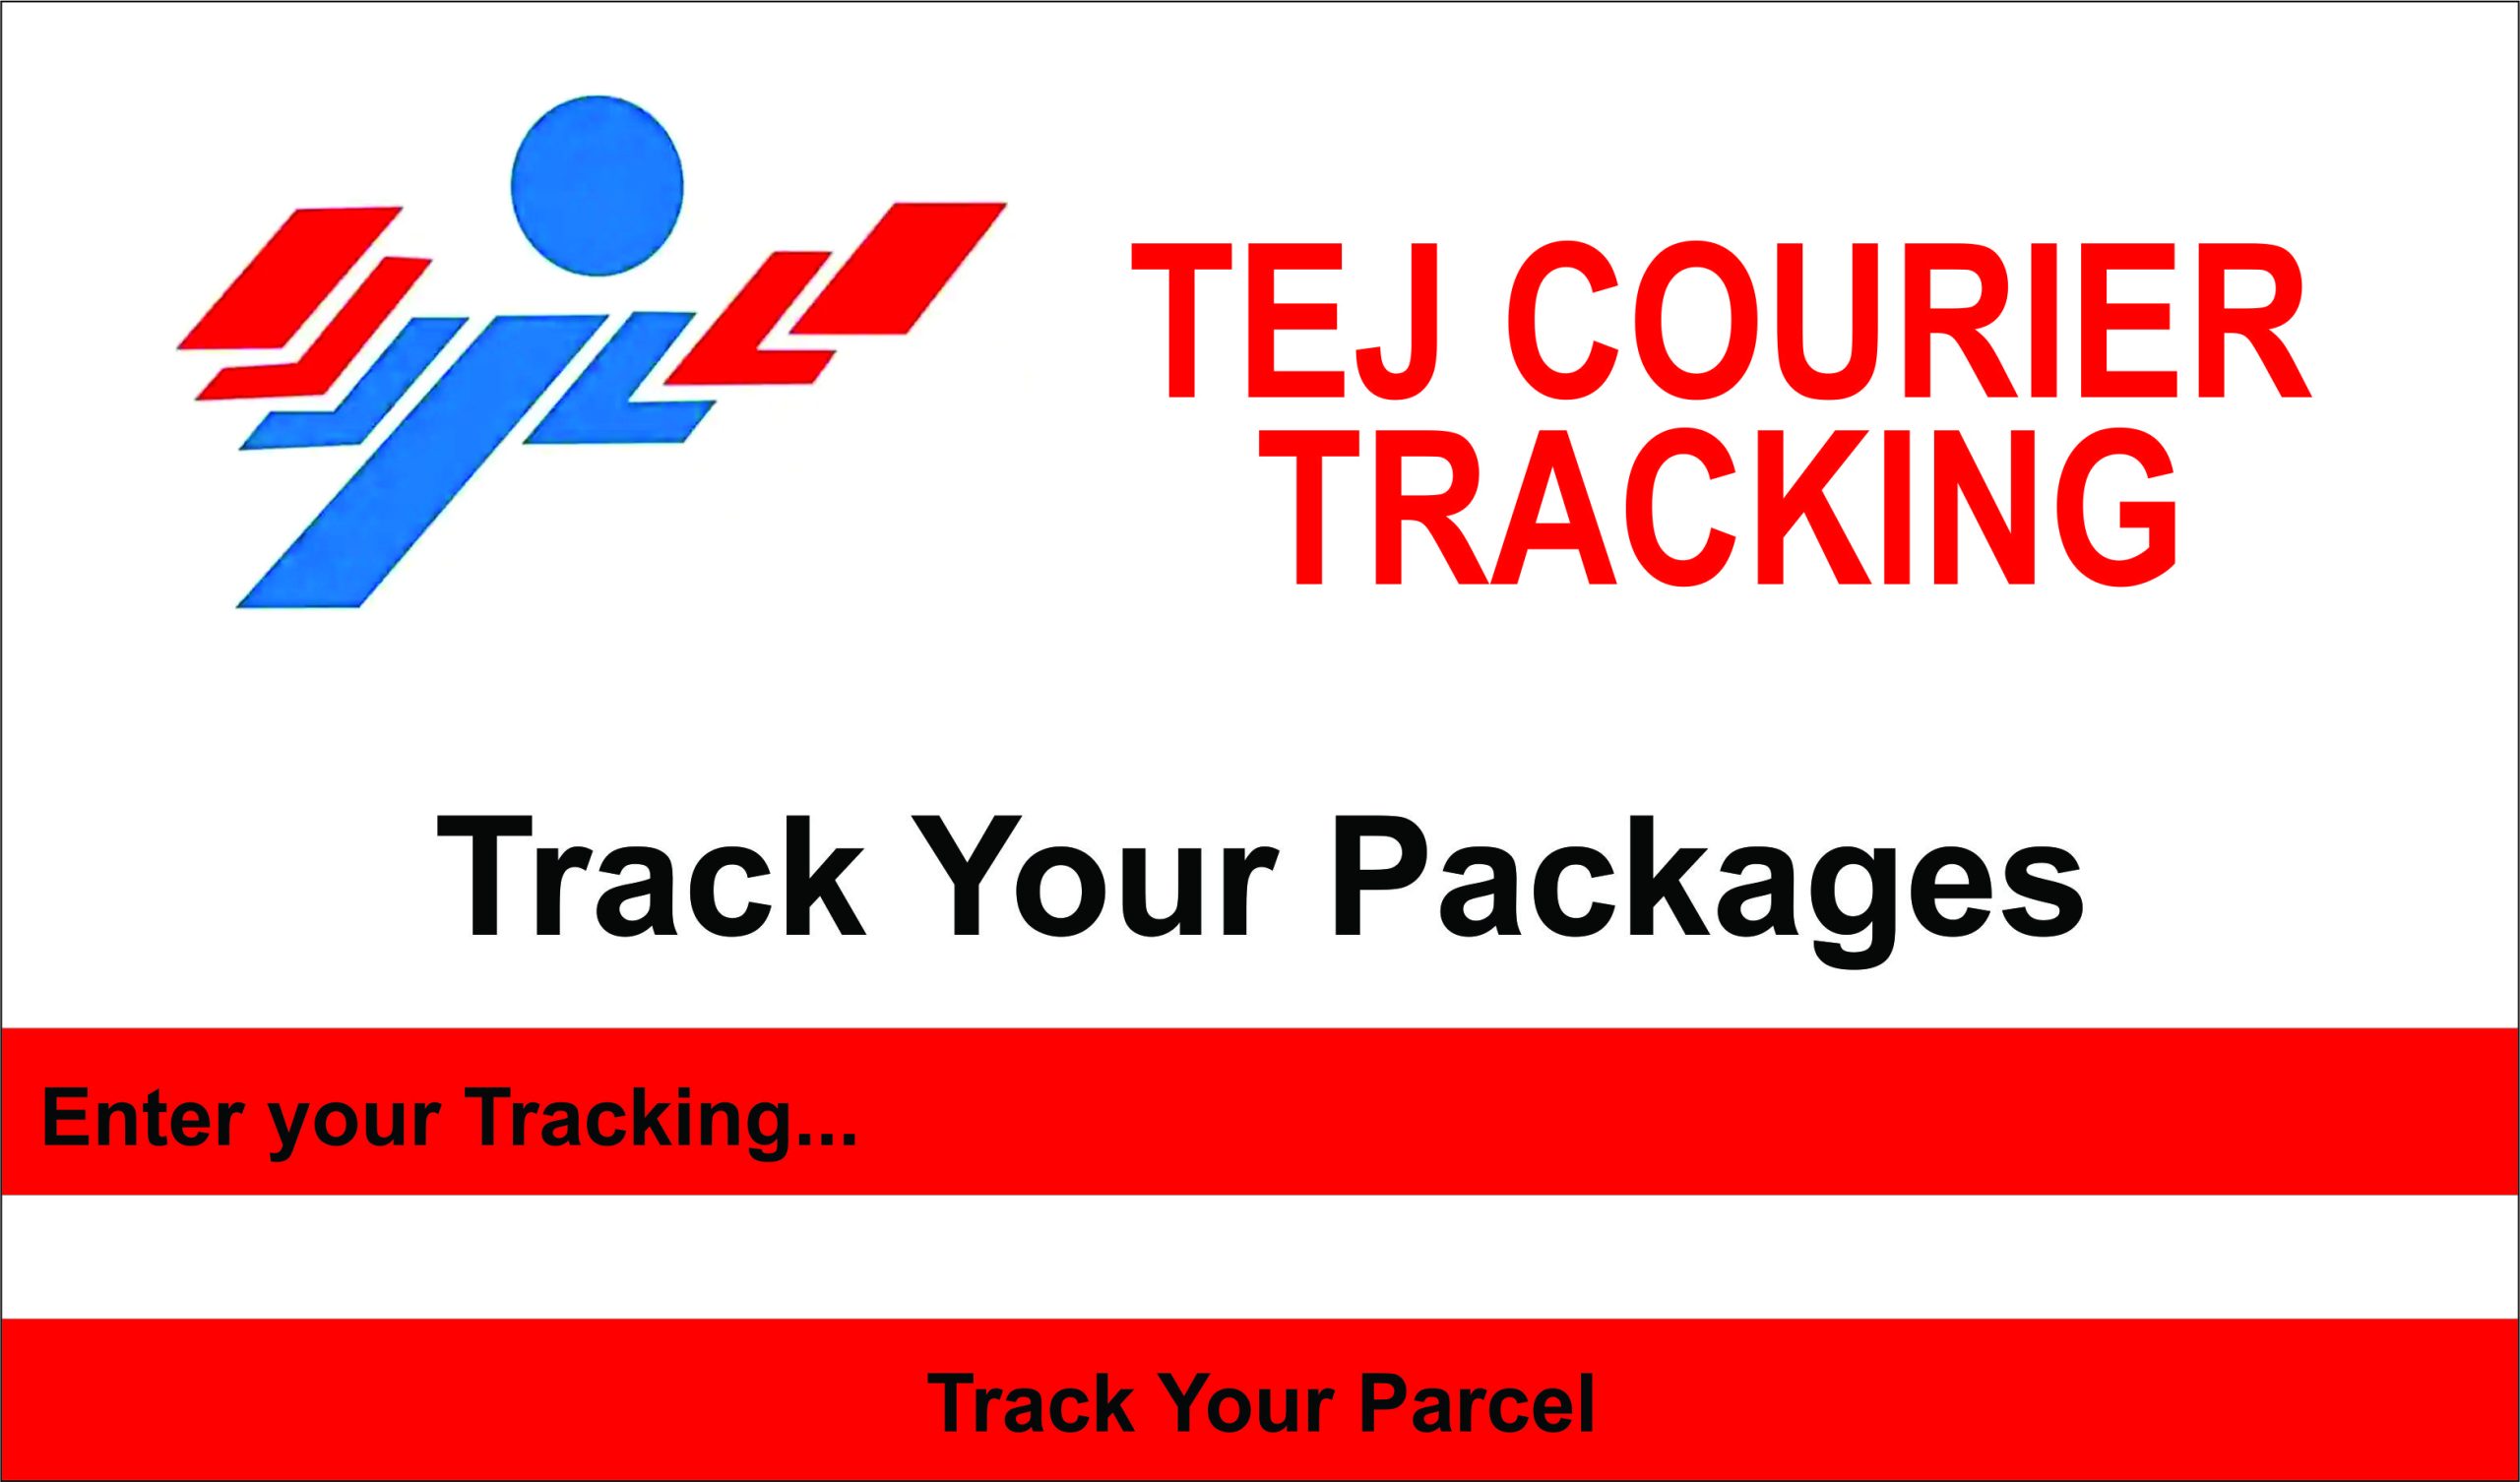 tej courier tracking